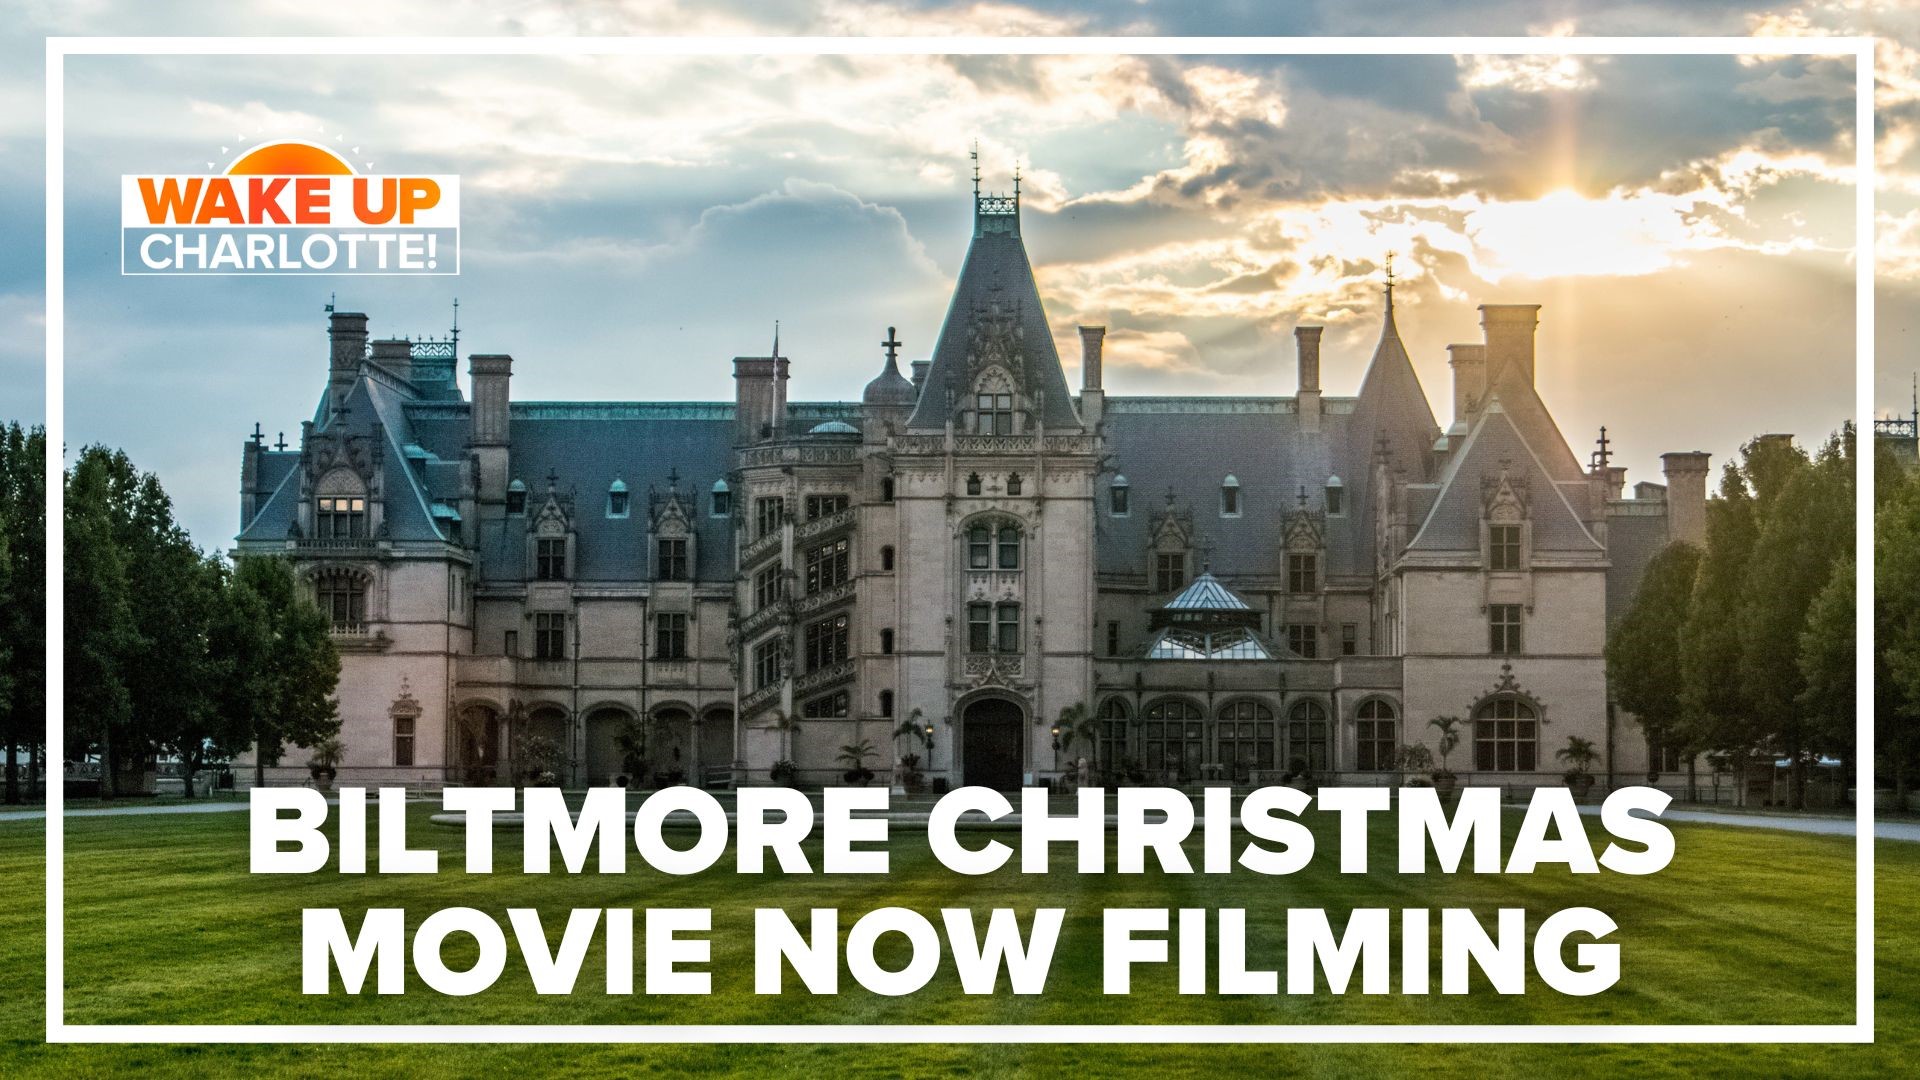 Filming is underway for a new Hallmark Christmas movie at the Biltmore Estate in Asheville.